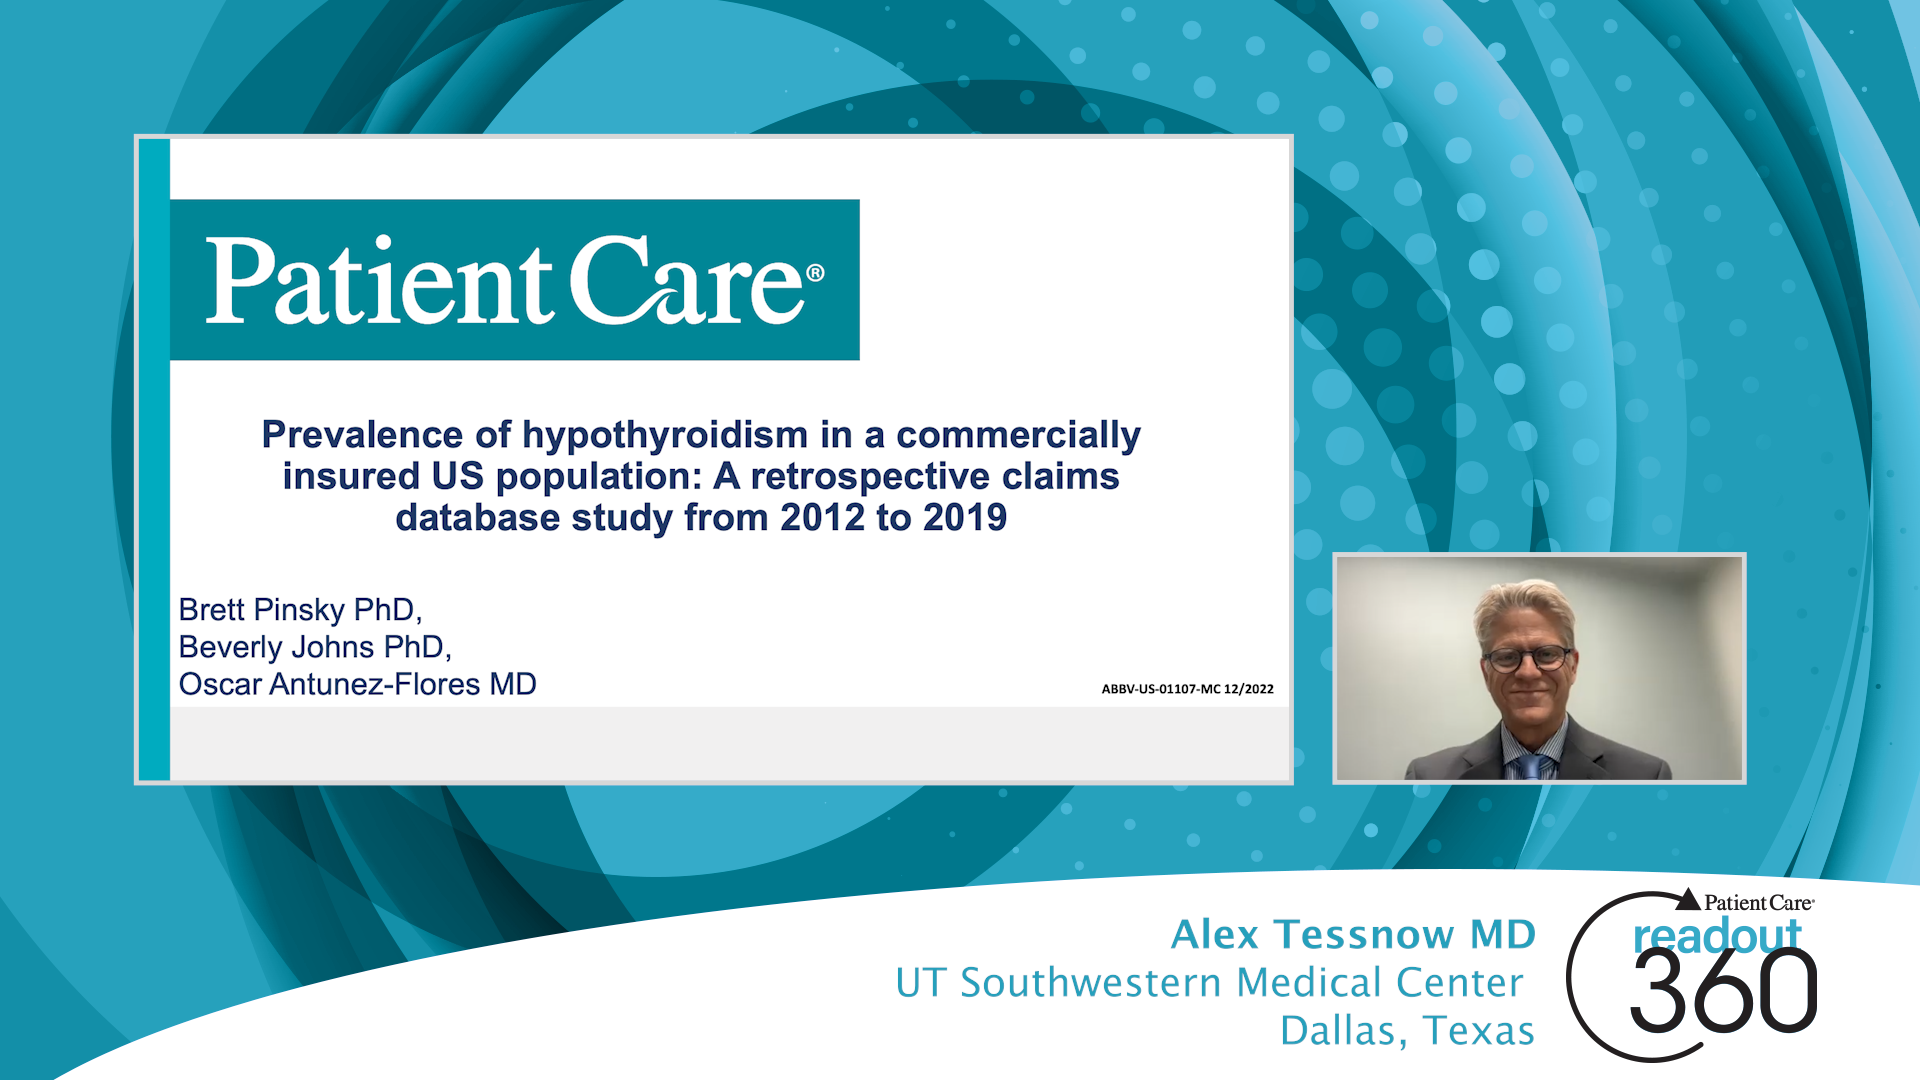 Prevalence of hypothyroidism in a commercially insured US population: A retrospective claims database study from 2012 to 2019